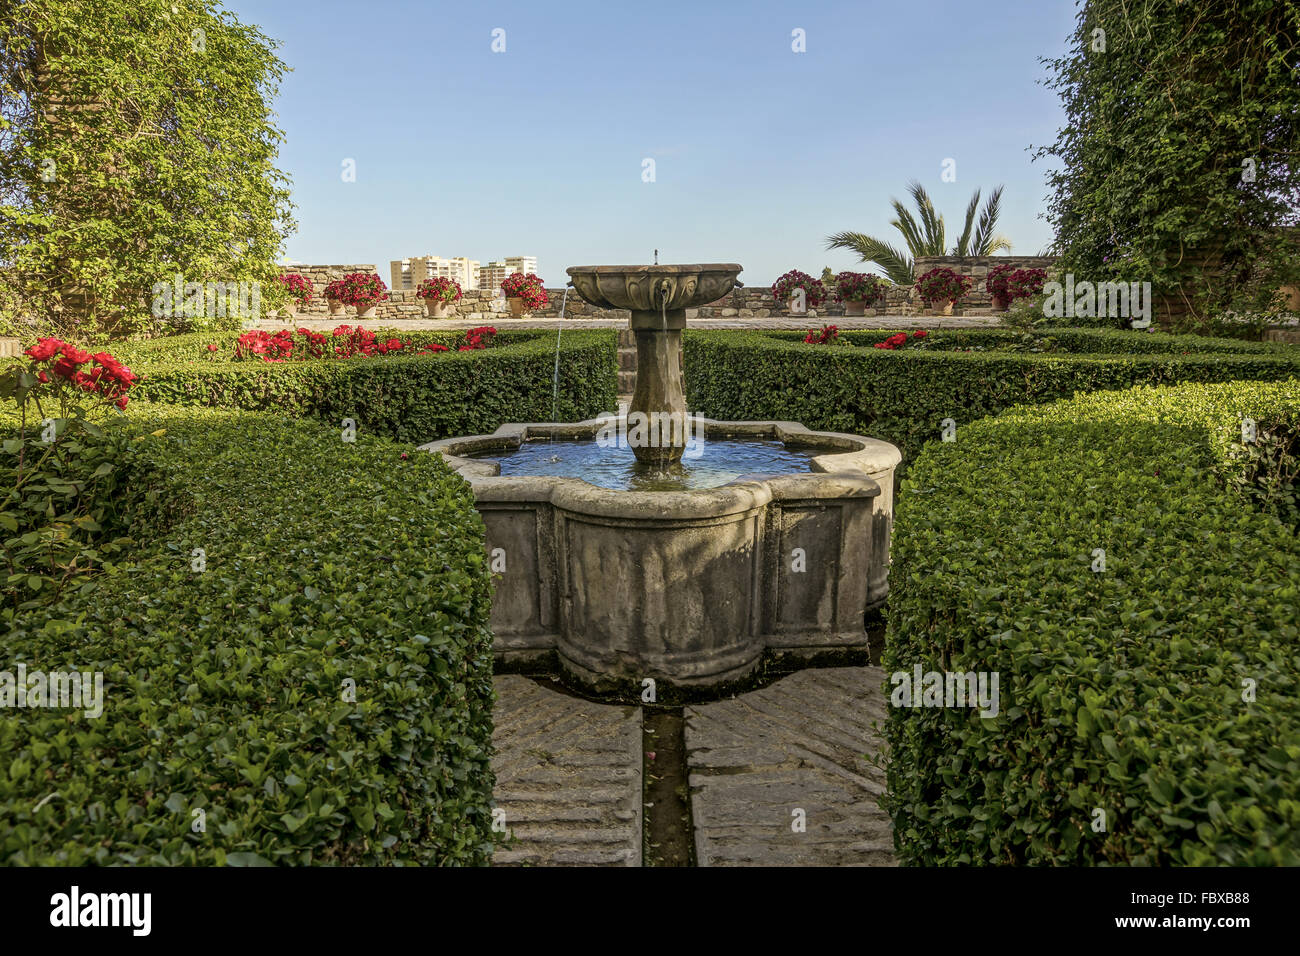 Tavel Andalusien Reise Andalusien Stockfoto